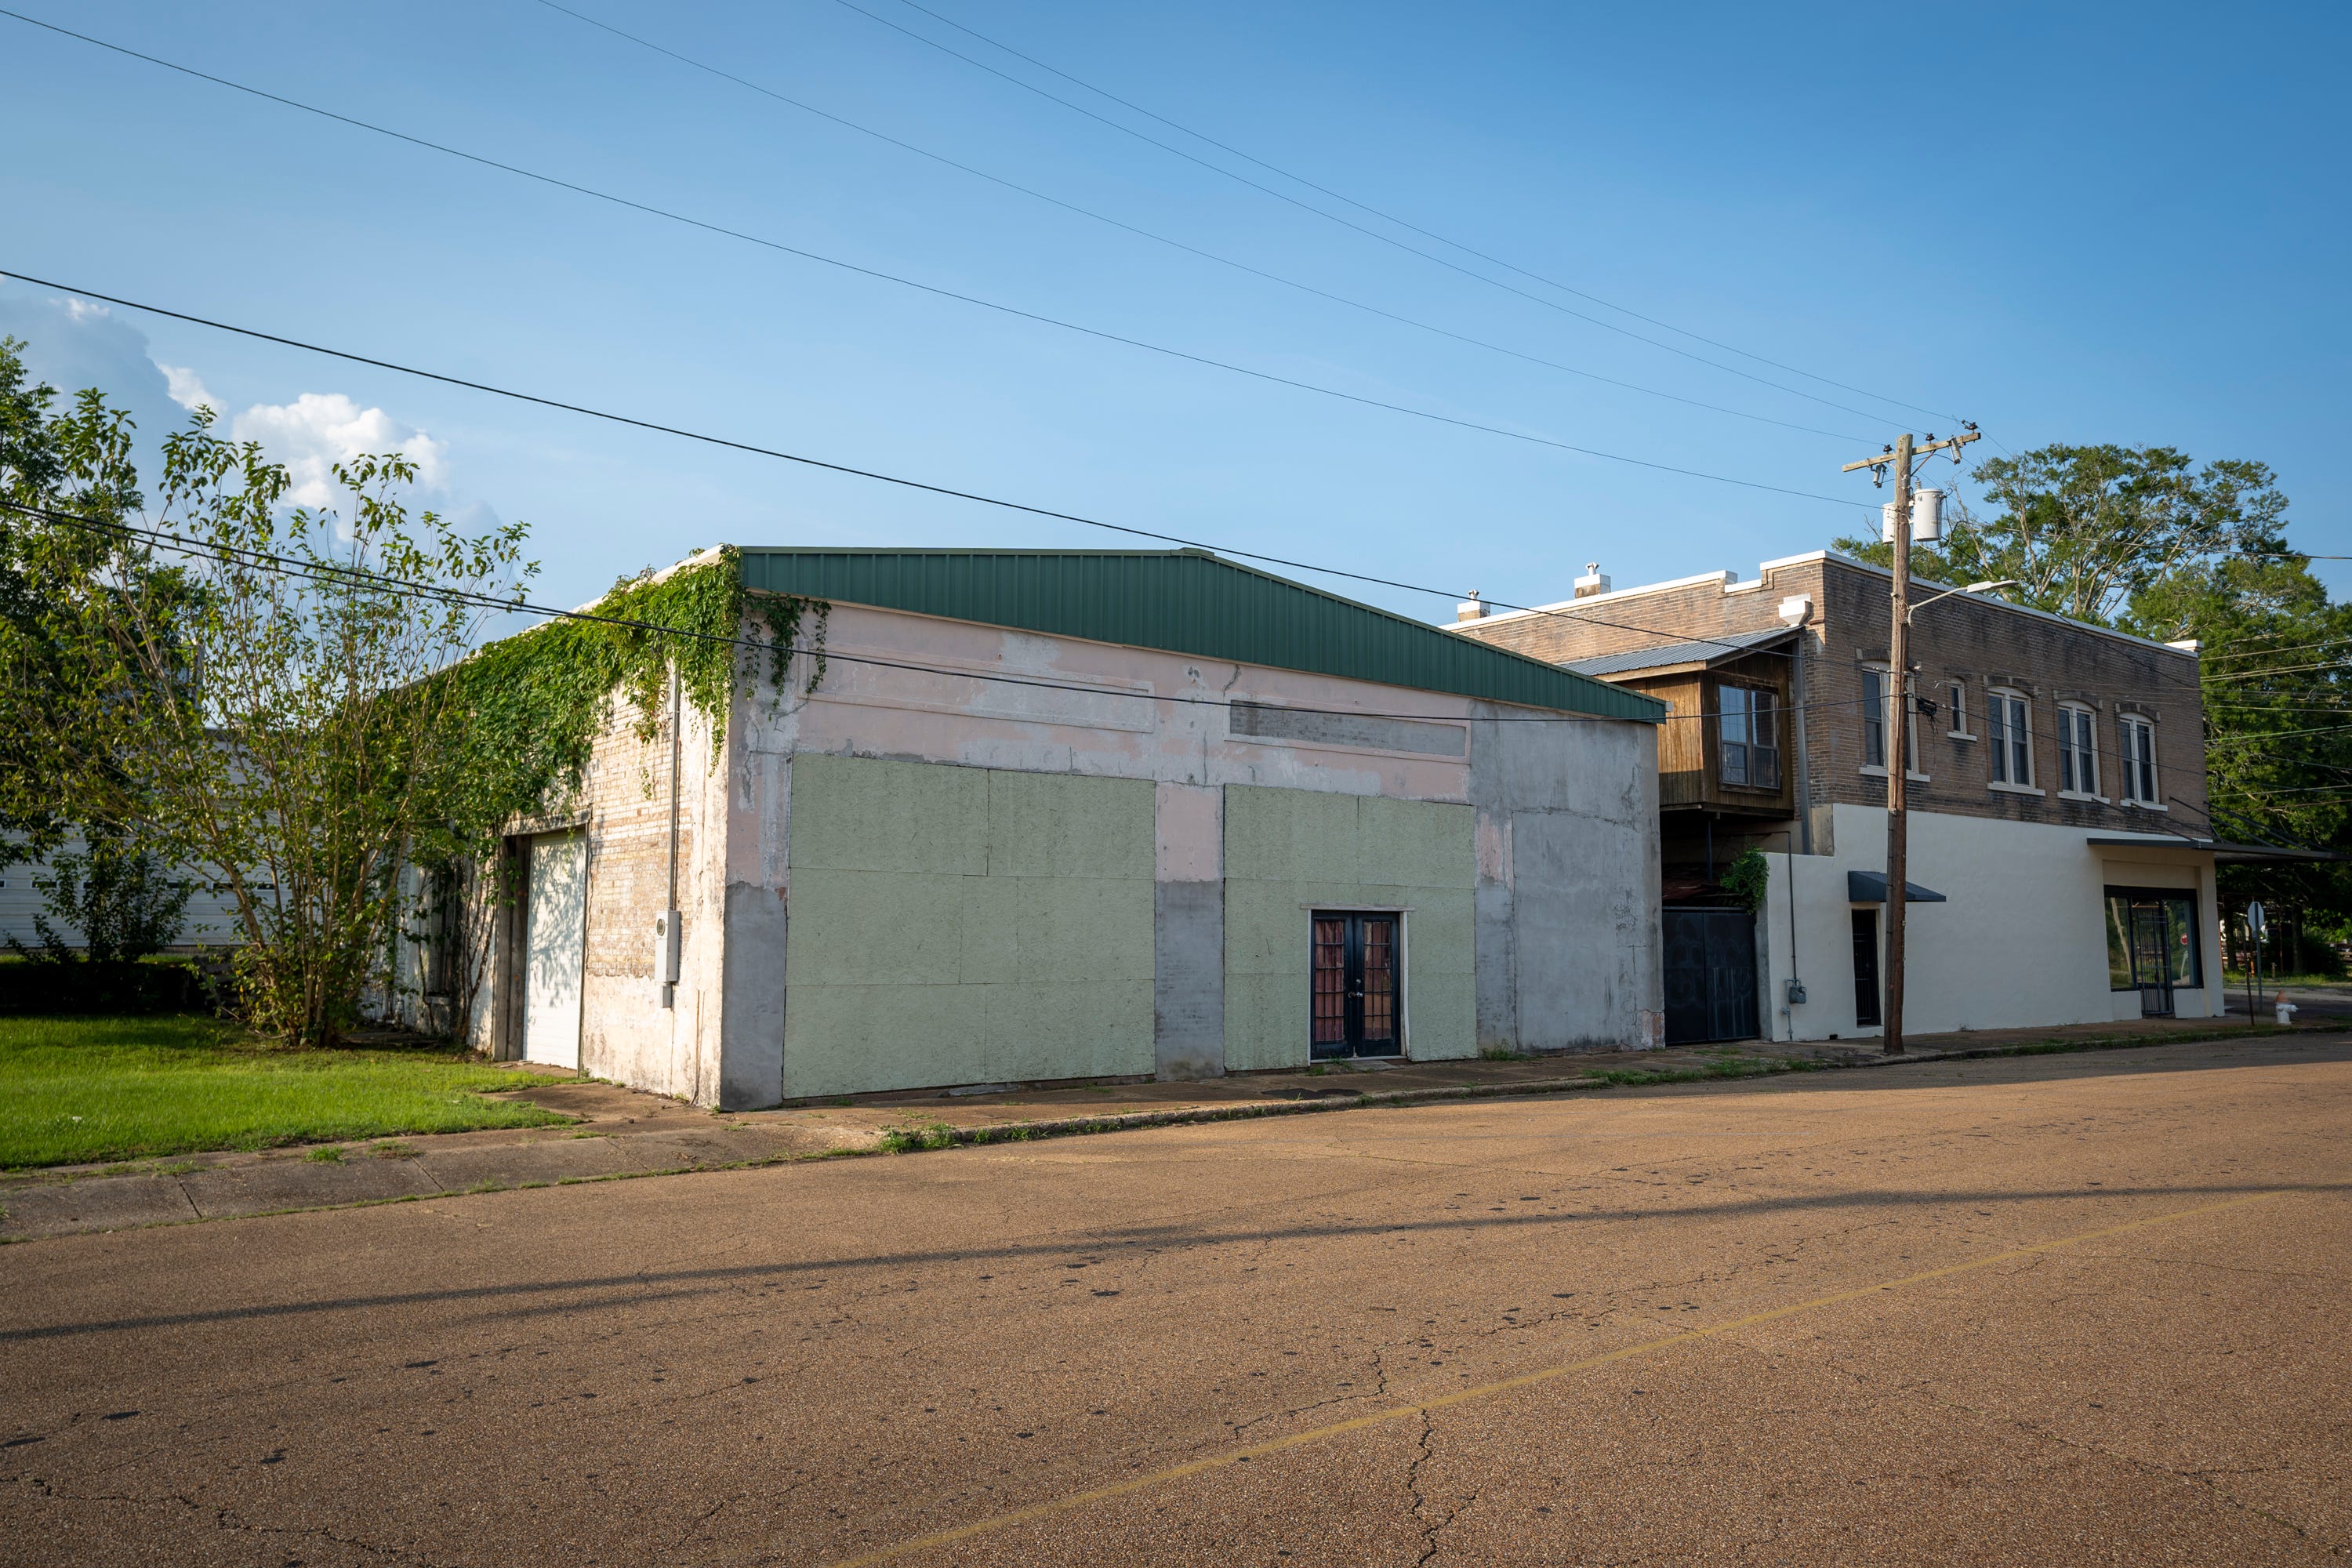 The former Greyhound station in downtown McComb, where Robert "Bobby" Talbert, Brenda Travis and Ike Lewis were arrested for sitting in the white-only section, sits unmarked. On Oct. 4, 1961, more than 100 Black students from Burglund High School in McComb, Mississippi, walked out to protest the expulsion of fellow student Brenda Travis, a voting rights activist, and the murder of civil rights activist Herbert Lee. McComb became the epicenter of the Student Nonviolent Coordinating Committee’s campaign to register Black Mississippians to vote. It would set the stage for other voter registration efforts across the South, the creation of Freedom Schools and Freedom Summer, when hundreds of volunteers converged on Mississippi to register Black people to vote.